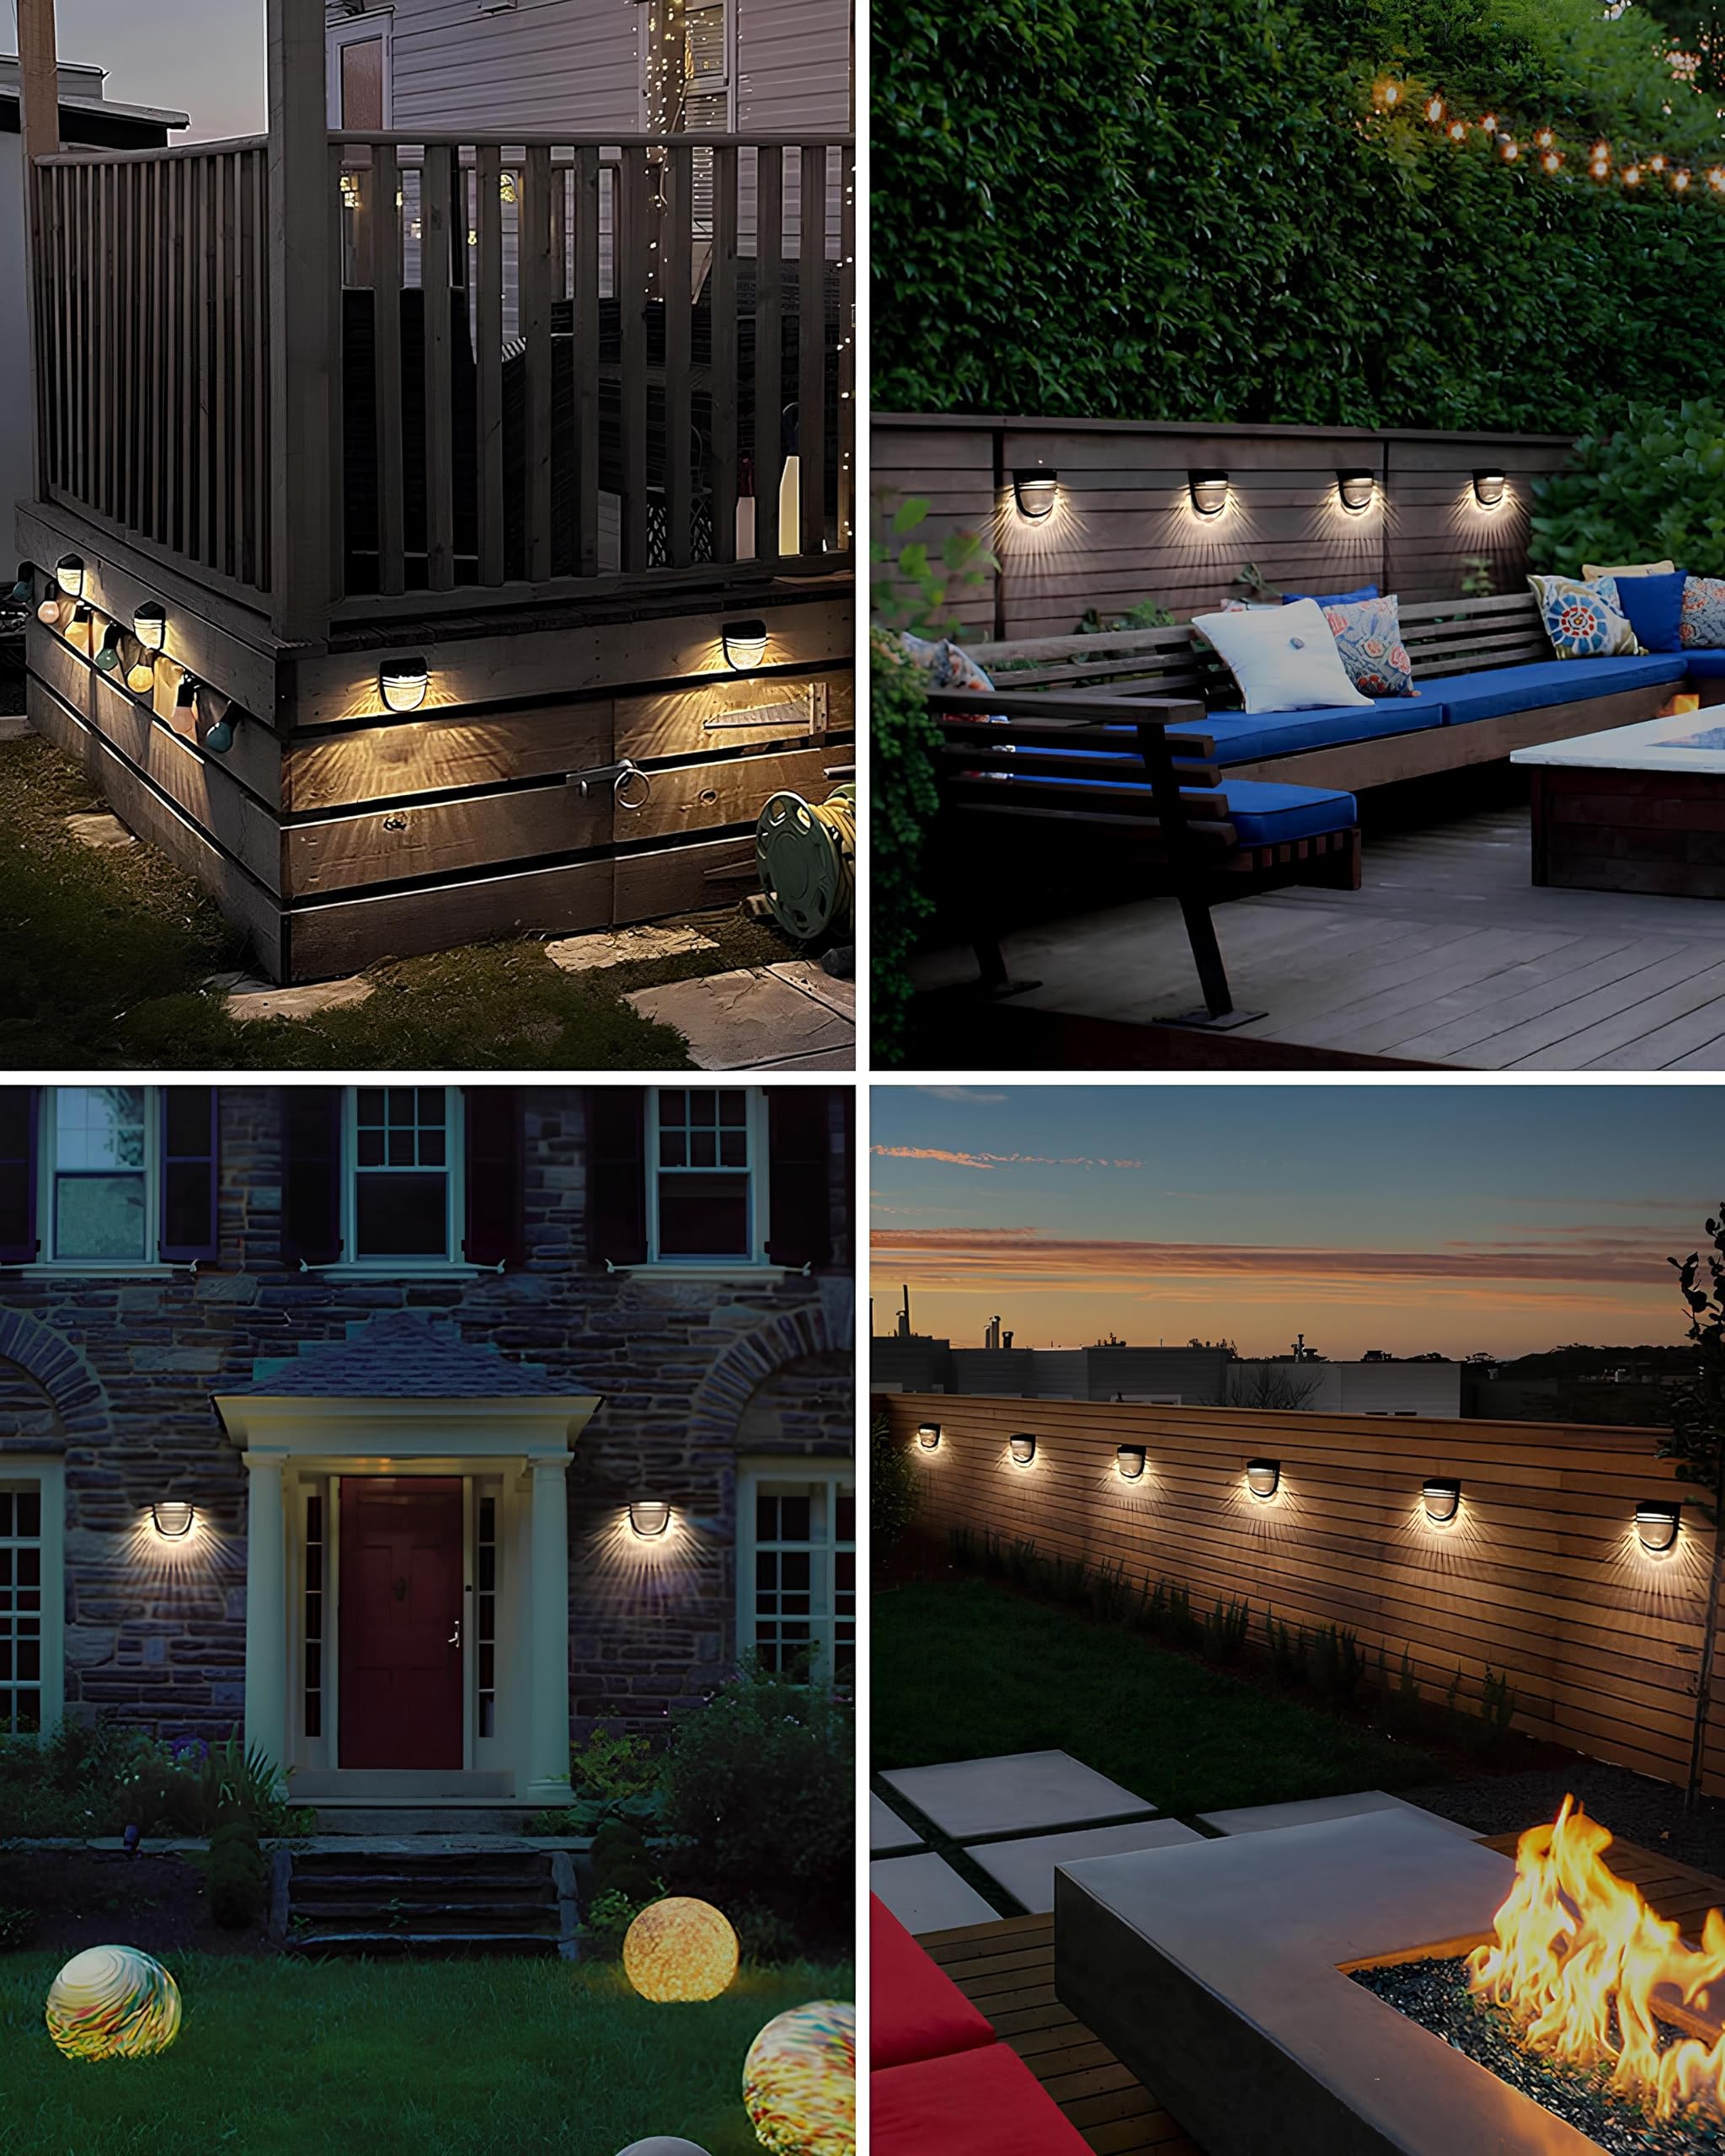 OOTDAY Outdoor Solar Wall Lights, Solar Fence Lights, Solar Garden Lights, Solar Lights, Day/Night Sensor, Solar Conversion Rate 20%, Outdoor for Garden, Path, Stairs, Patio, Pool